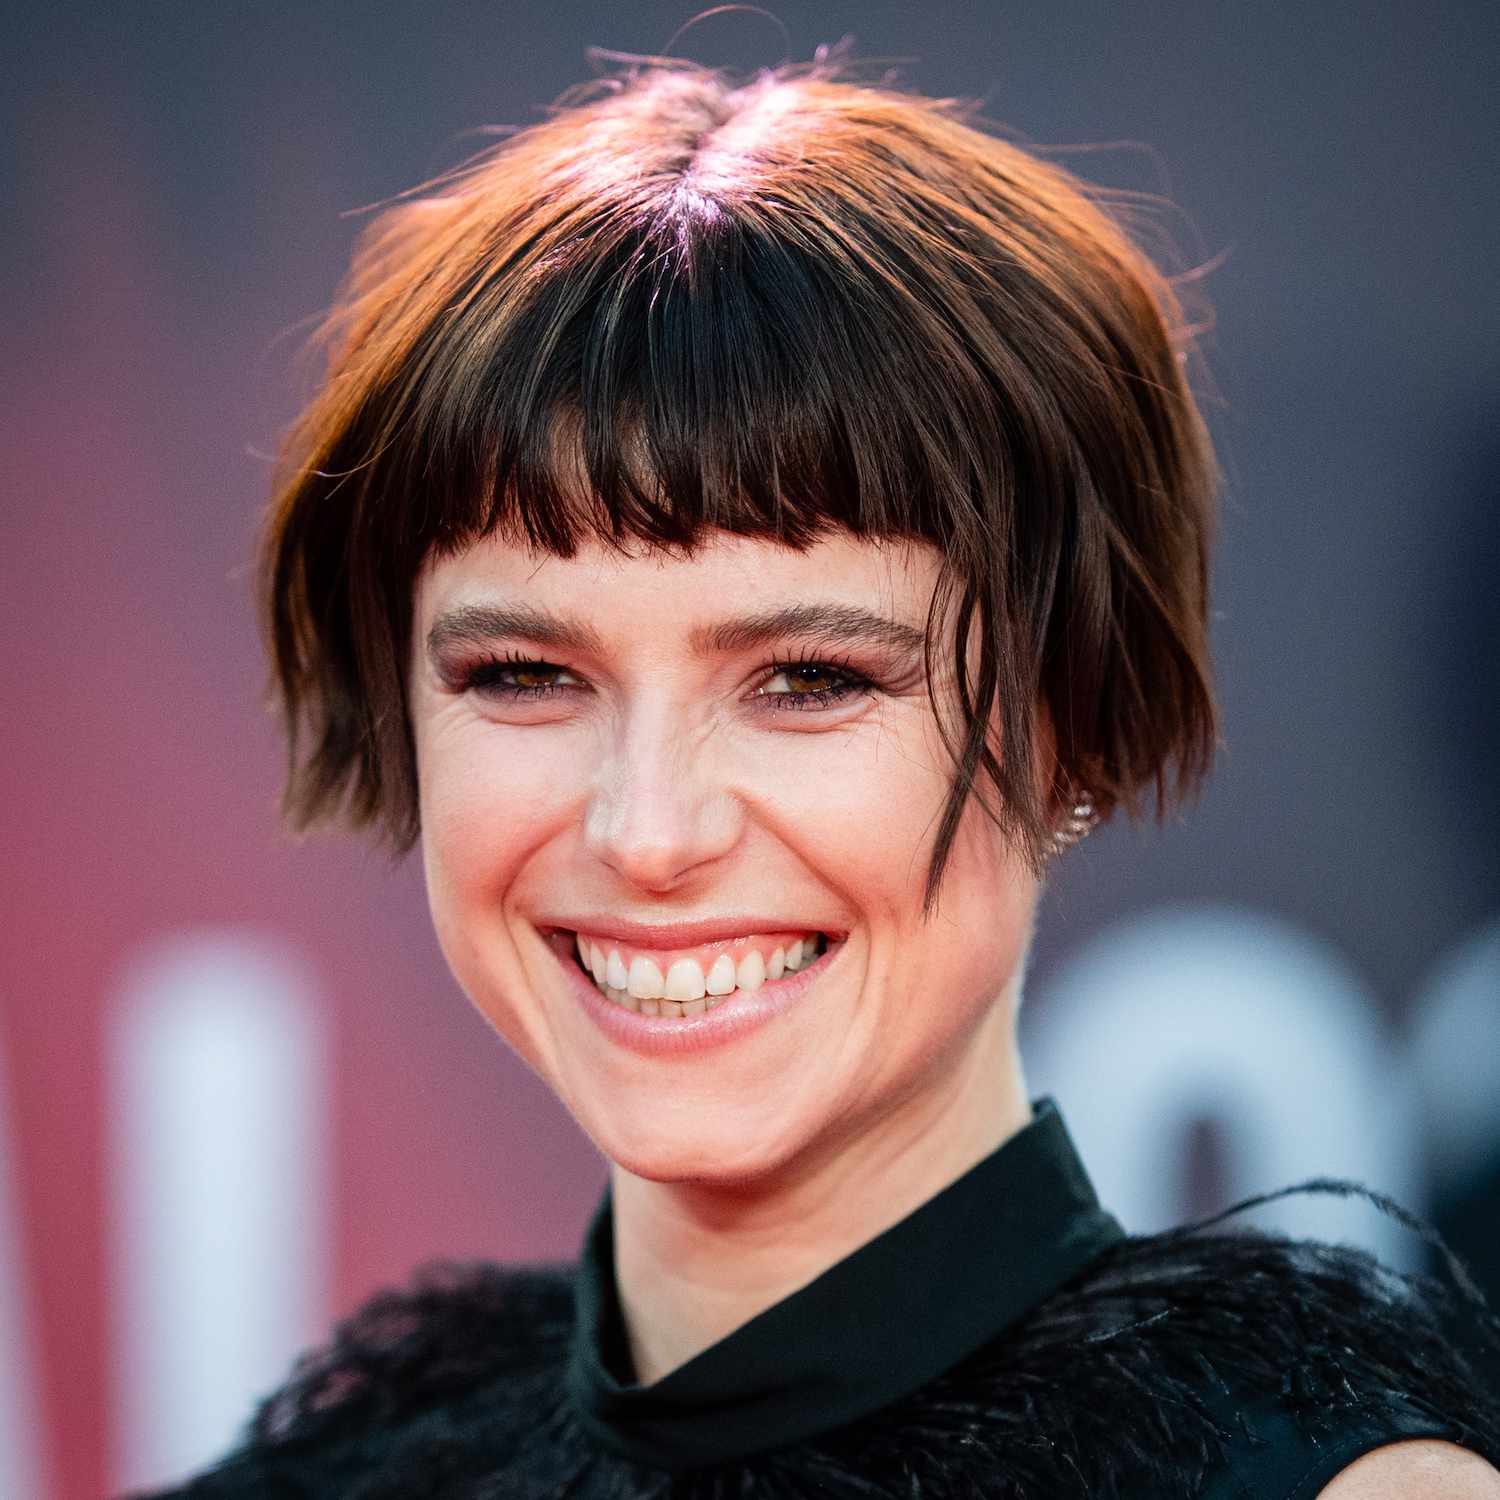 Jessie Buckley wears a micro bob hairstyle with baby bangs